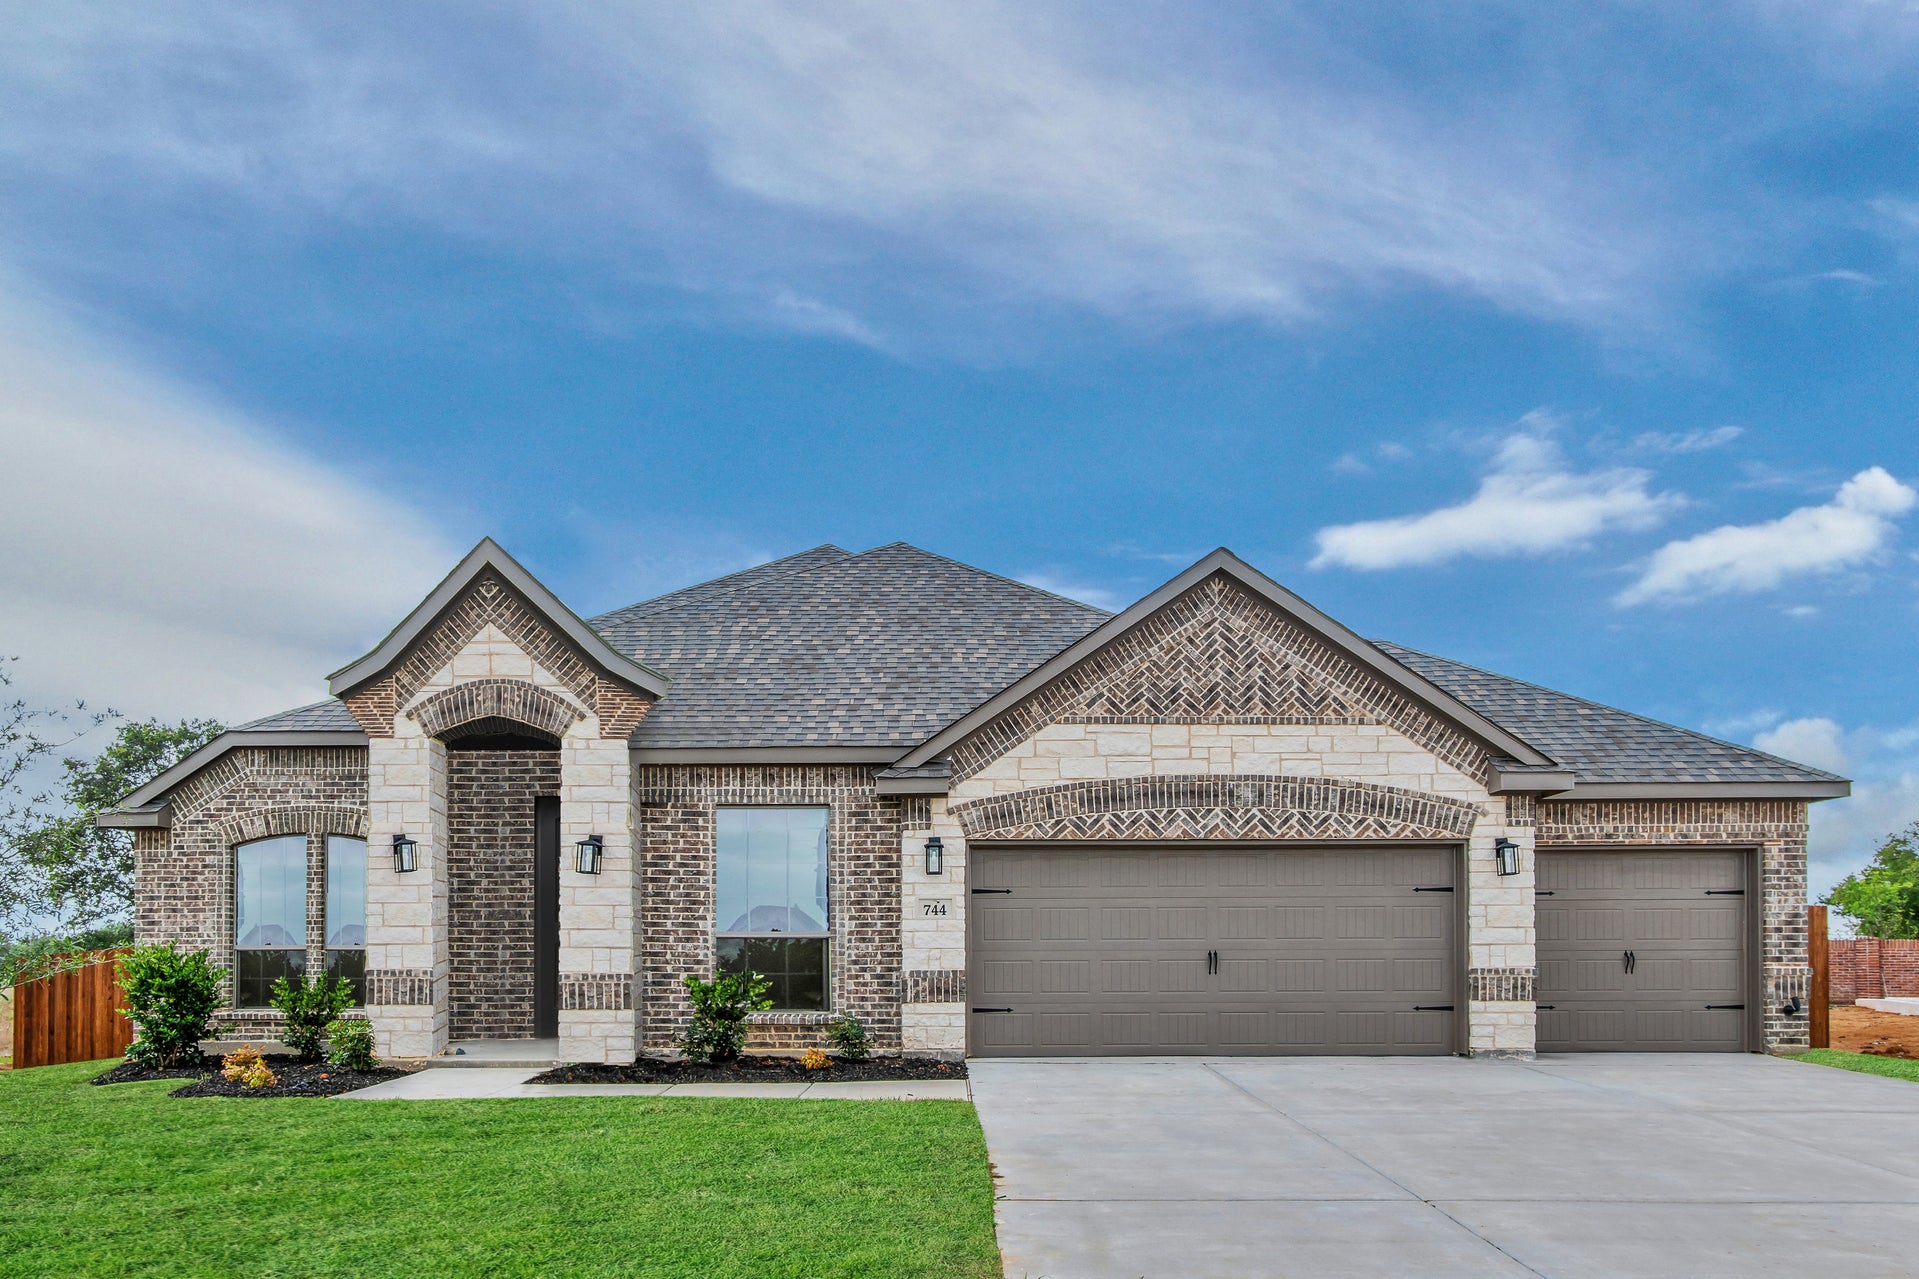 2671 A with Stone and 3-car garage. 4br New Home in Burleson, TX